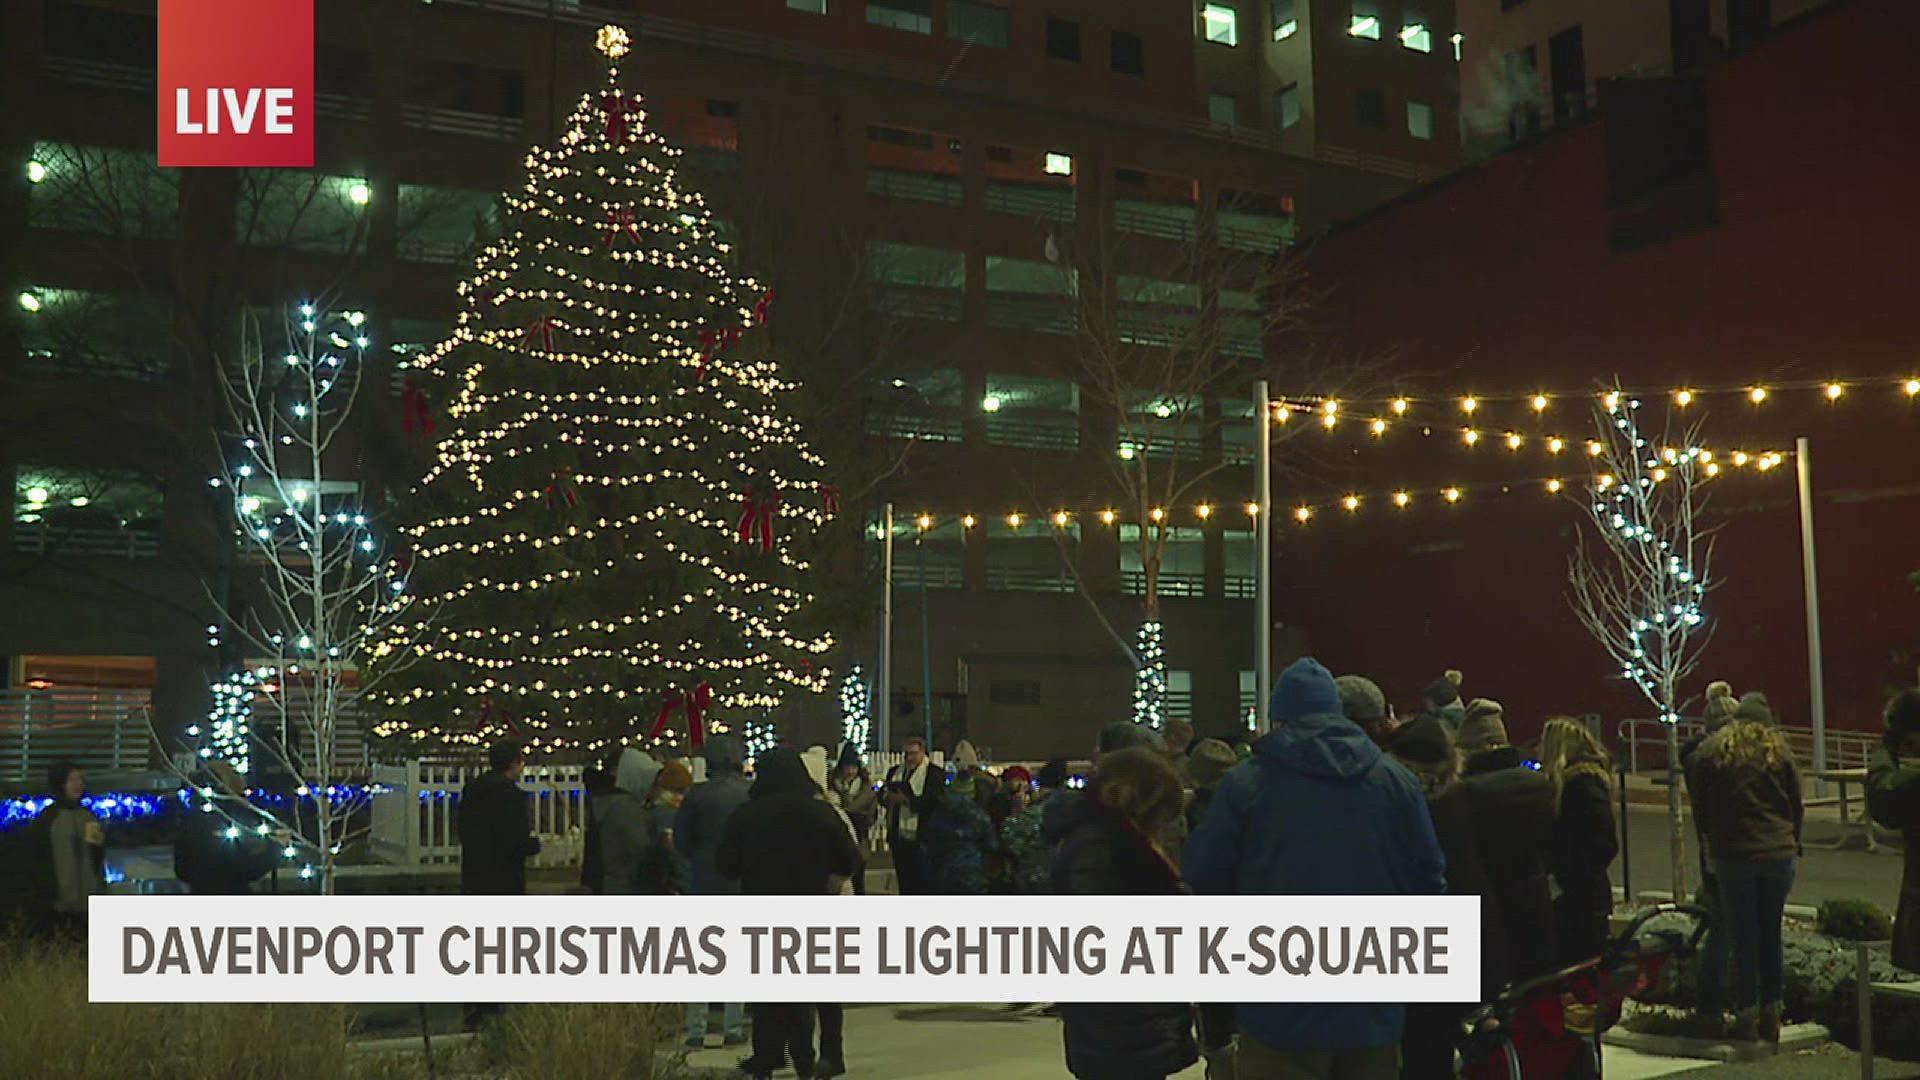 Davenport lit its Christmas tree at K-Square Friday night. The Festival of Trees is set to open to the public the next day.